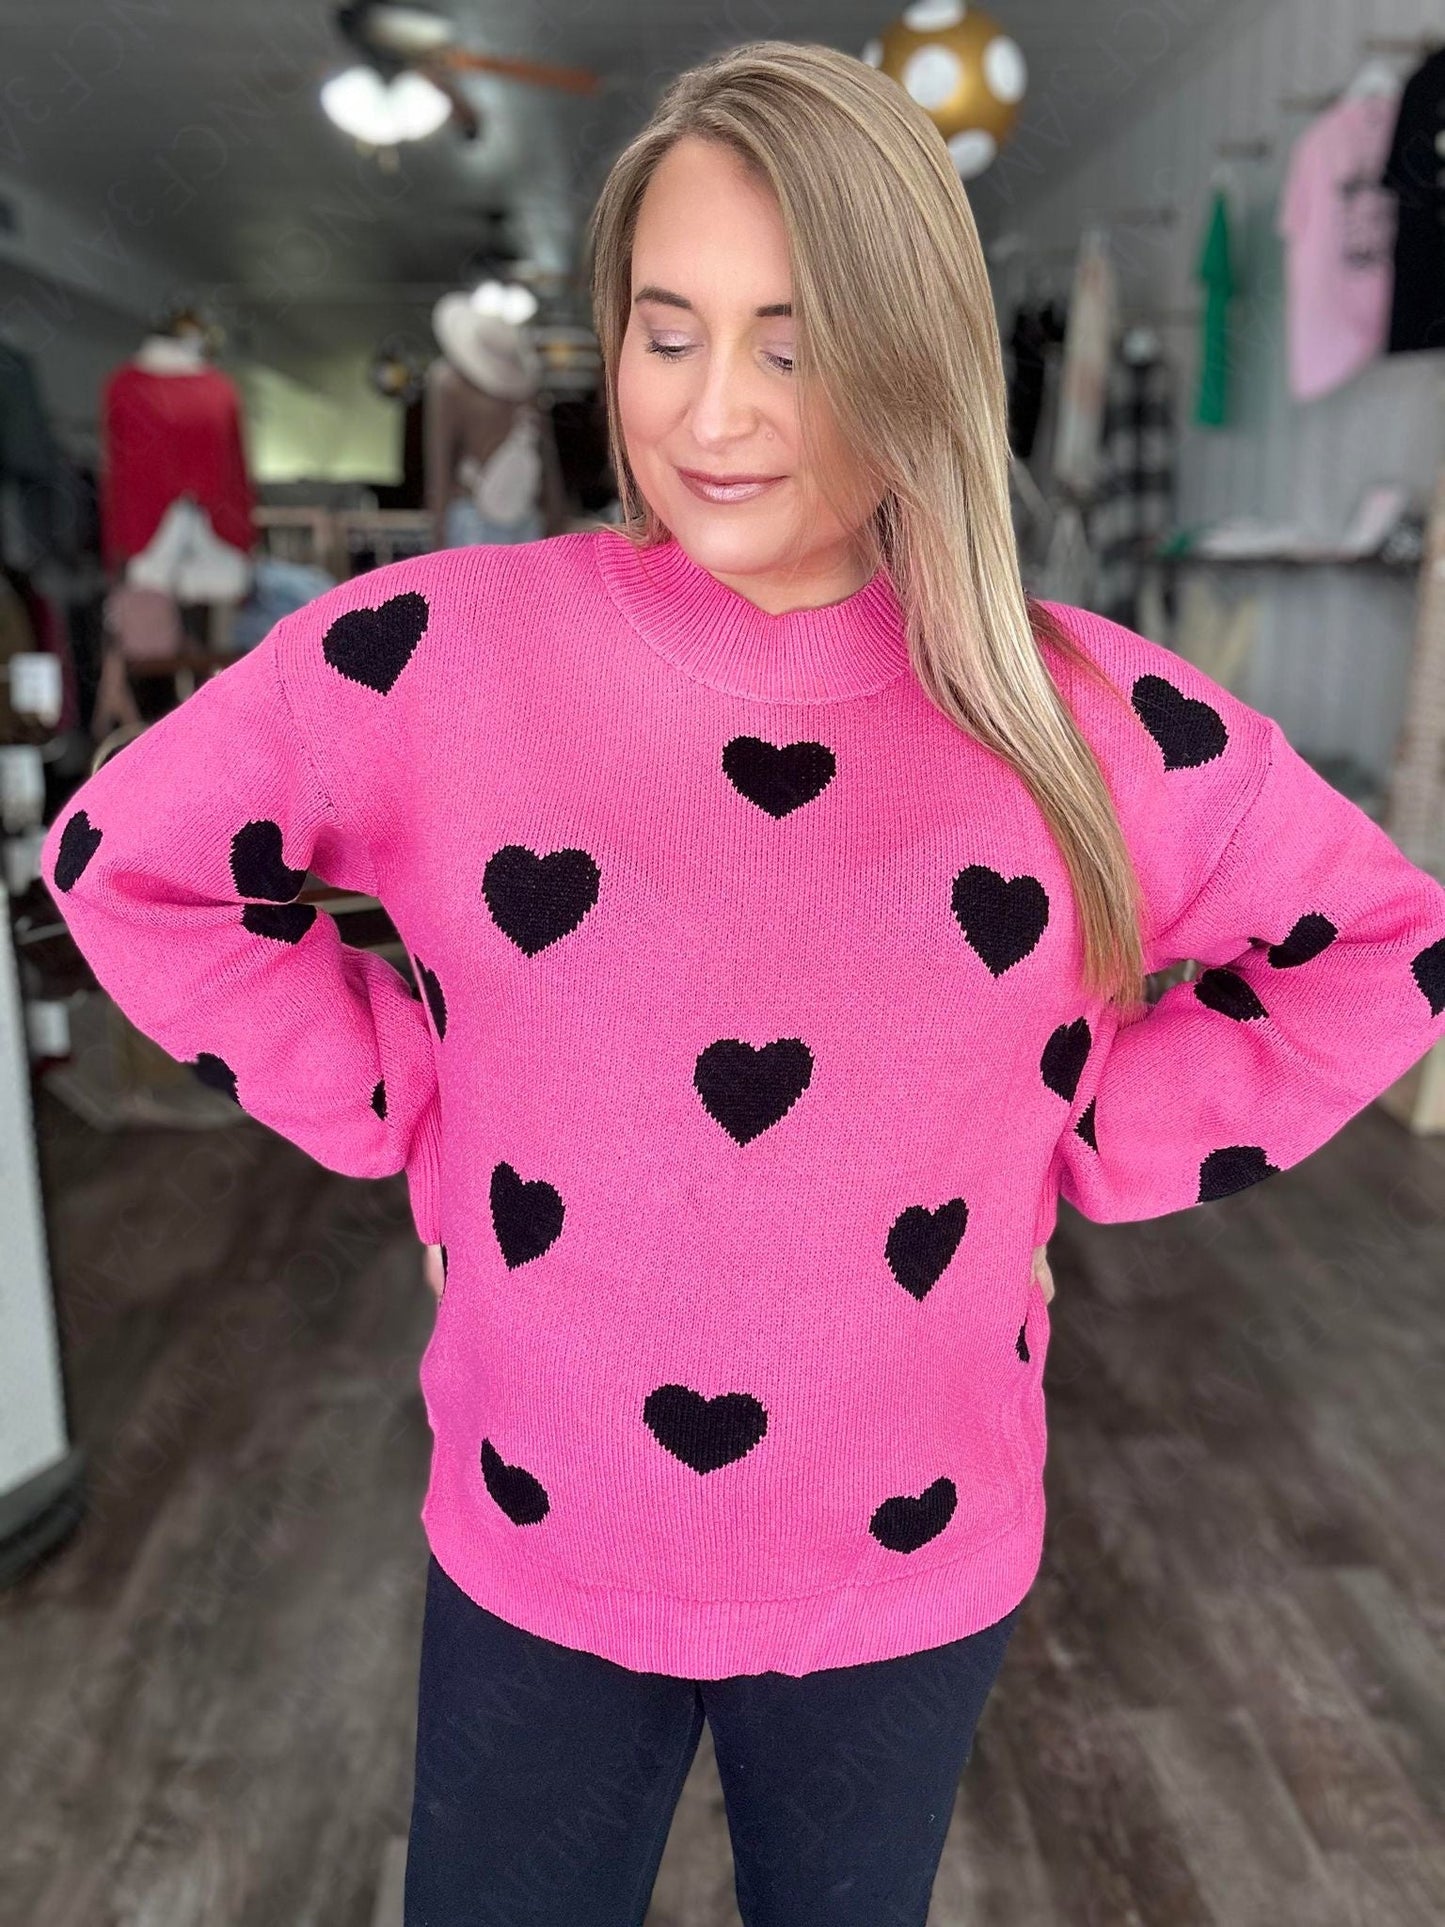 RTS: The Hearts All Over Sweater*